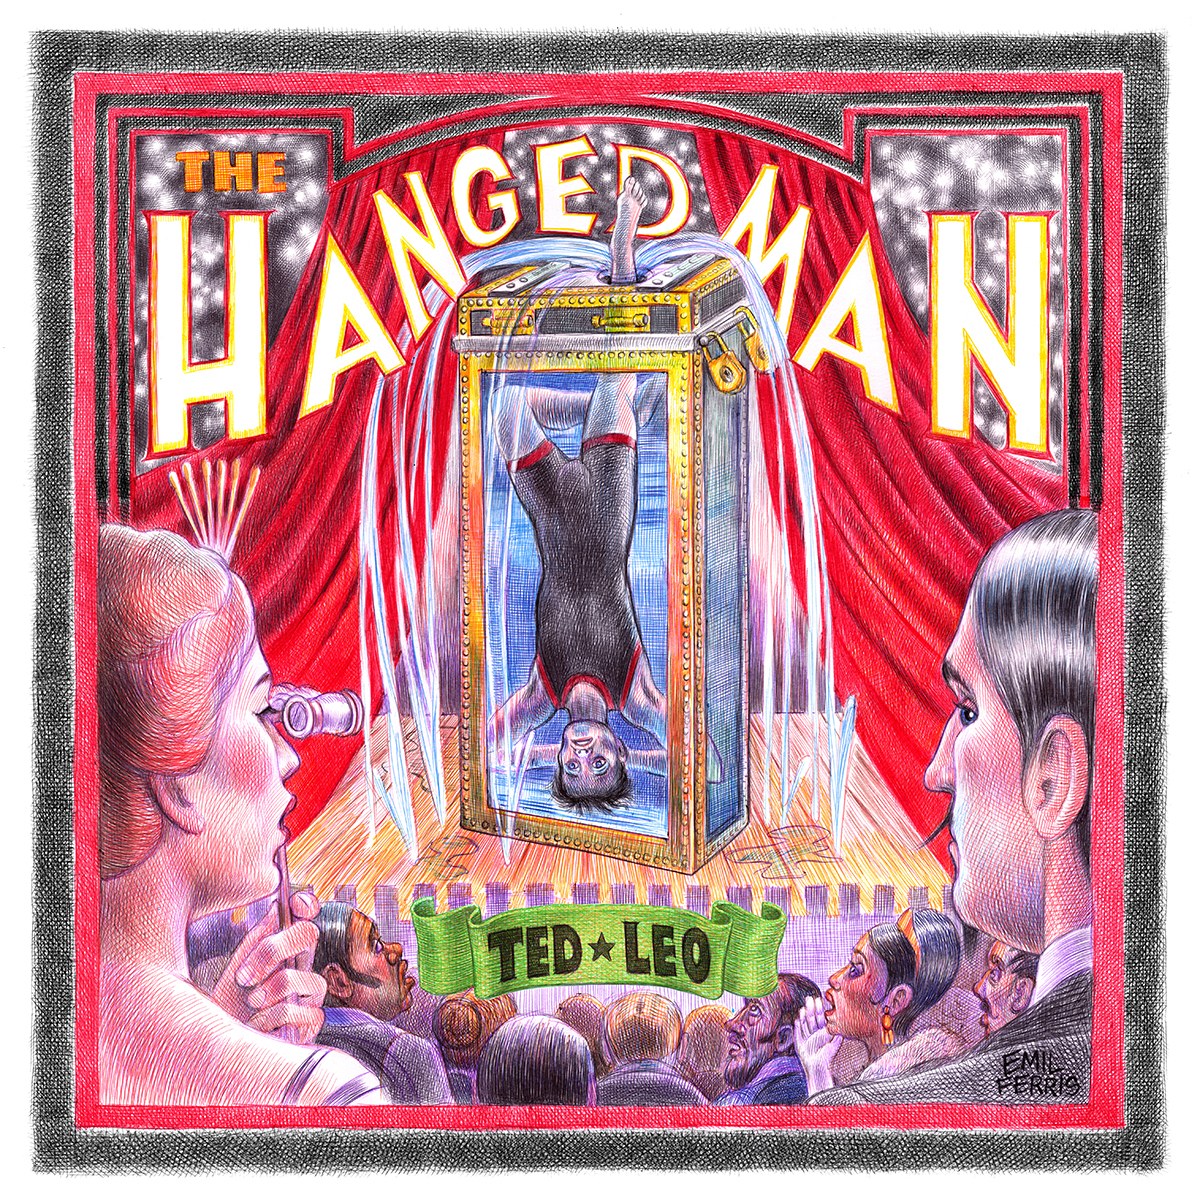 Ted Leo Details New Album <i></noscript>The Hanged Man</i>, Releases First Single “You’re Like Me”” title=”ted3d_smaller_2-1499355856″ data-original-id=”248119″ data-adjusted-id=”248119″ class=”sm_size_full_width sm_alignment_center ” data-image-source=”professional” /></p>
<p>1. Moon Out of Phase<br />
2. Used to Believe<br />
3. Can’t Go Back<br />
4. The Future<br />
5. William Weld in the 21st Century<br />
6. The Nazarene<br />
7. Run to the City<br />
8. Gray Havens<br />
9. Make Me Feel Loved<br />
10. The Little Smug Supper Club<br />
11. Anthems of None<br />
12. You’re Like Me<br />
13. Lonsdale Avenue<br />
14. Let’s Stay on the Moon</p><div class=